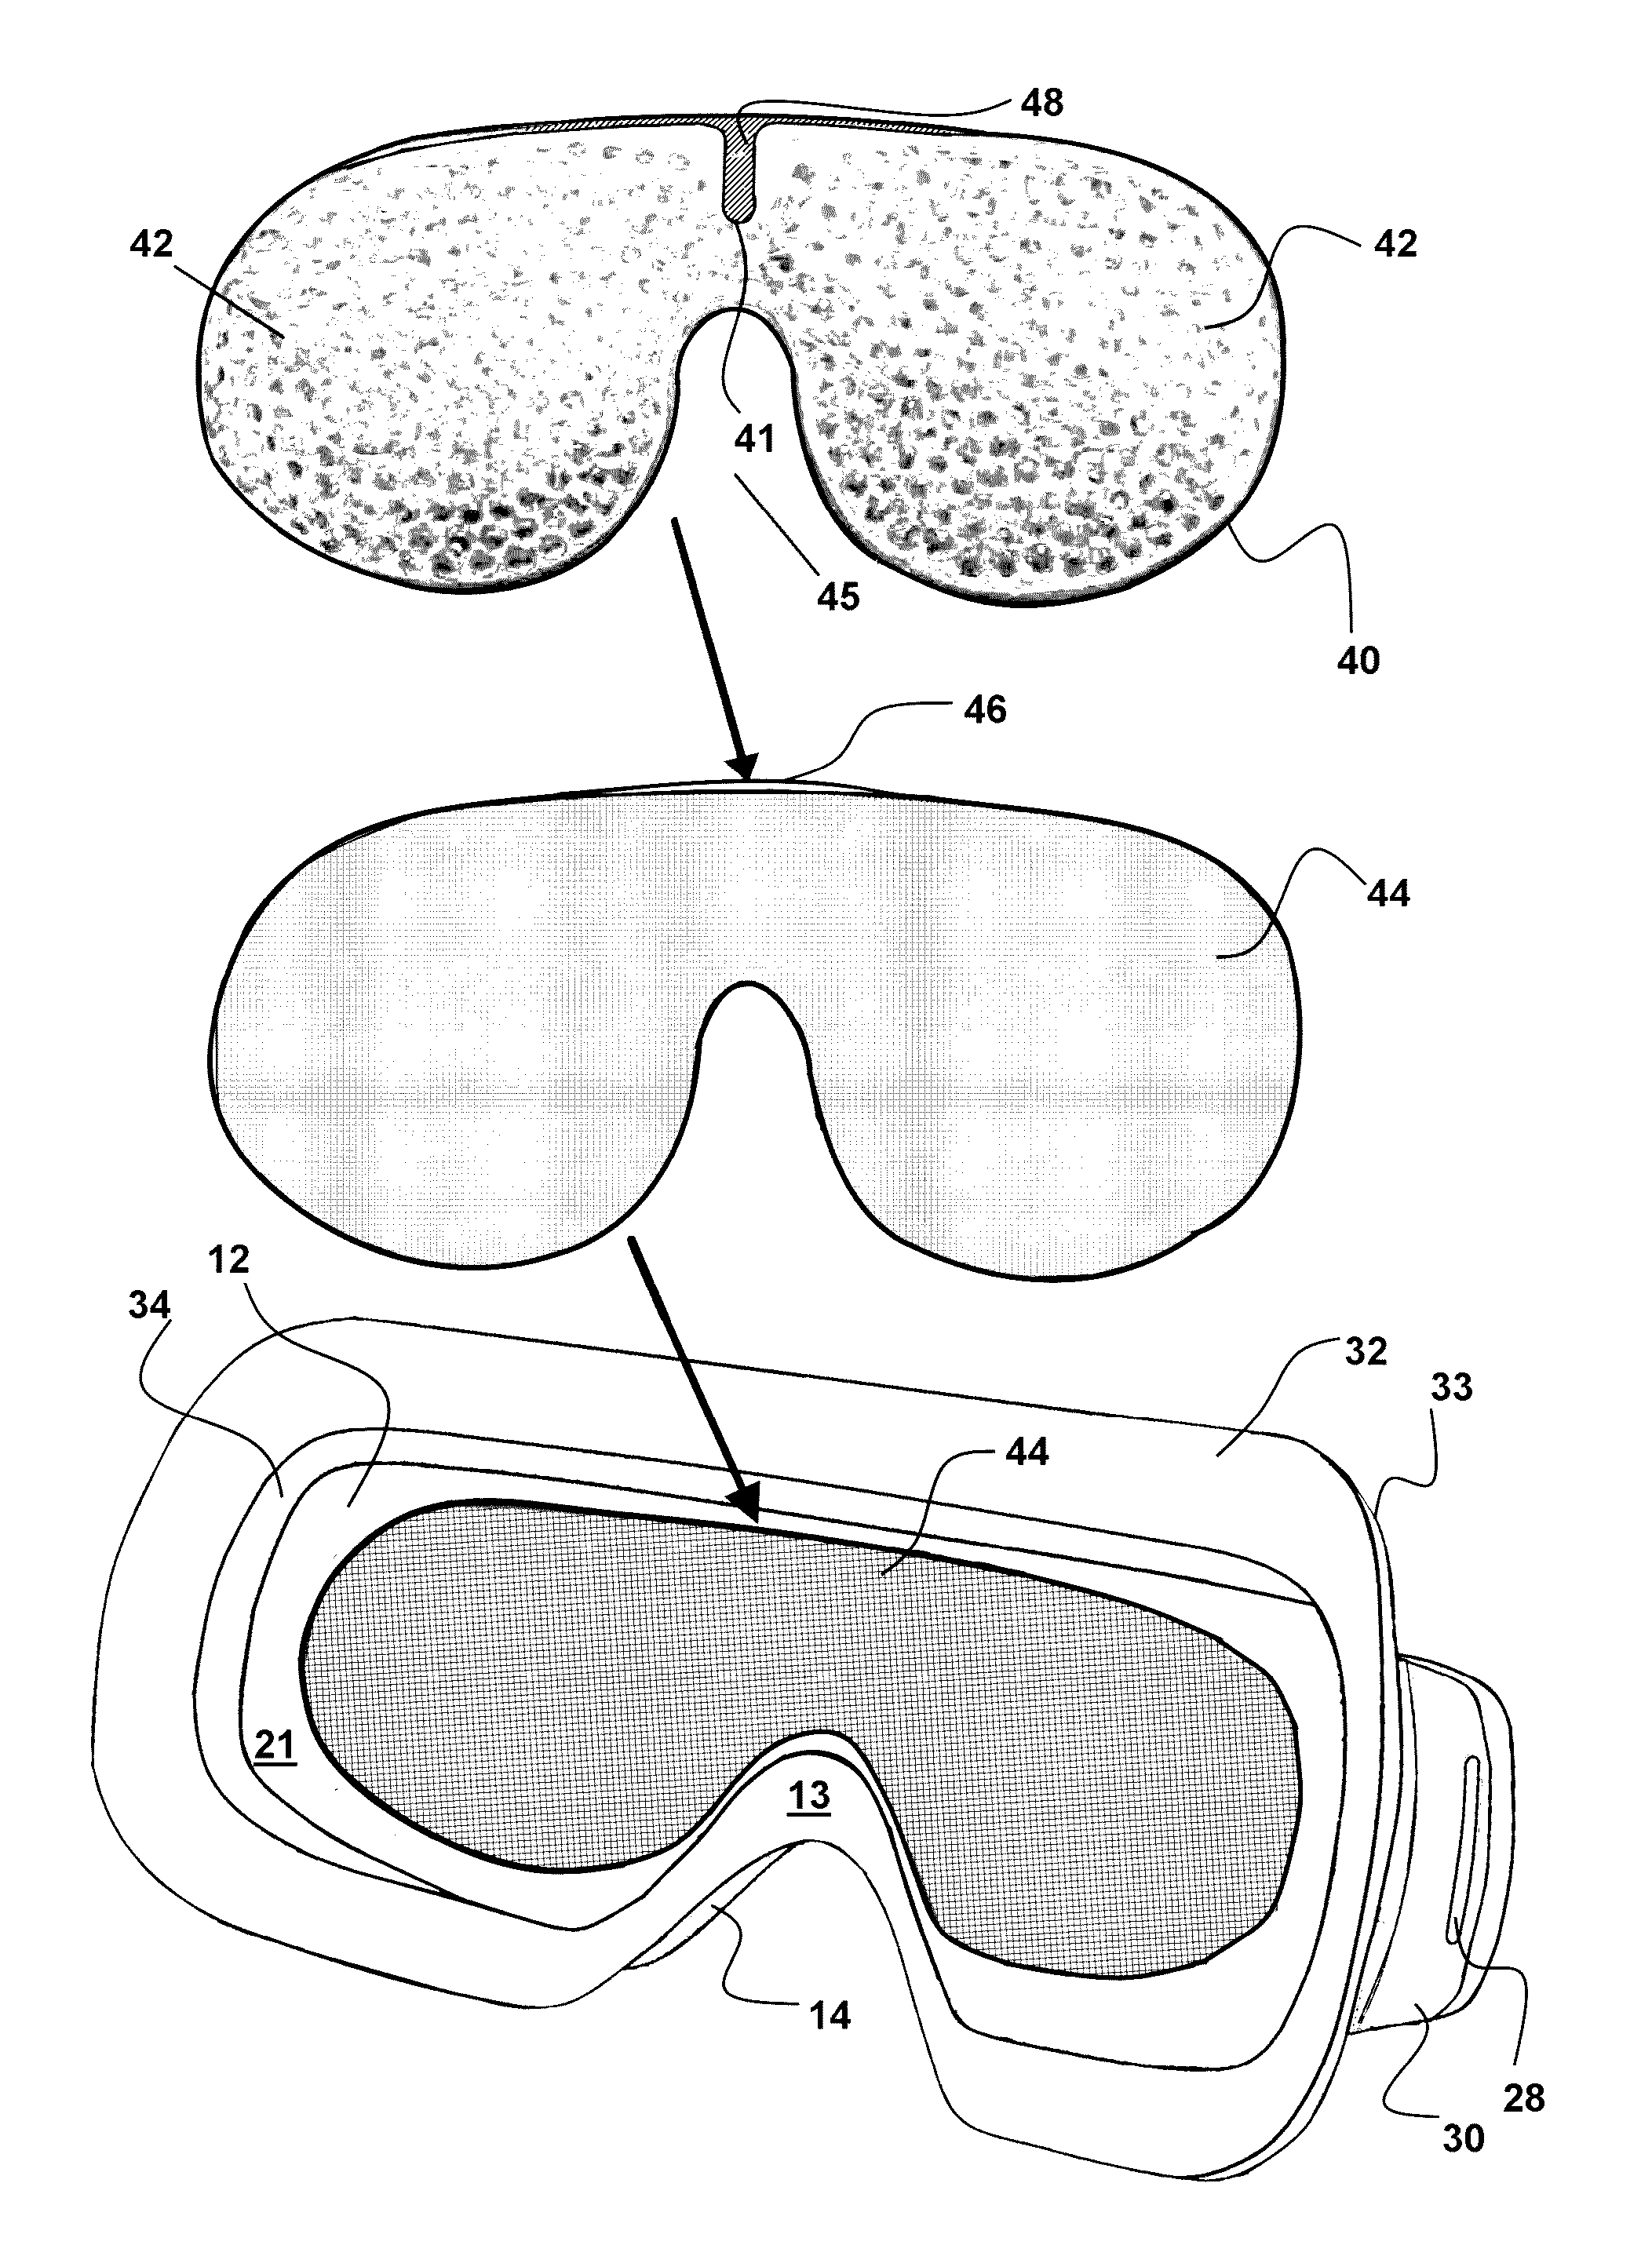 System for Treatment of Eye Conditions